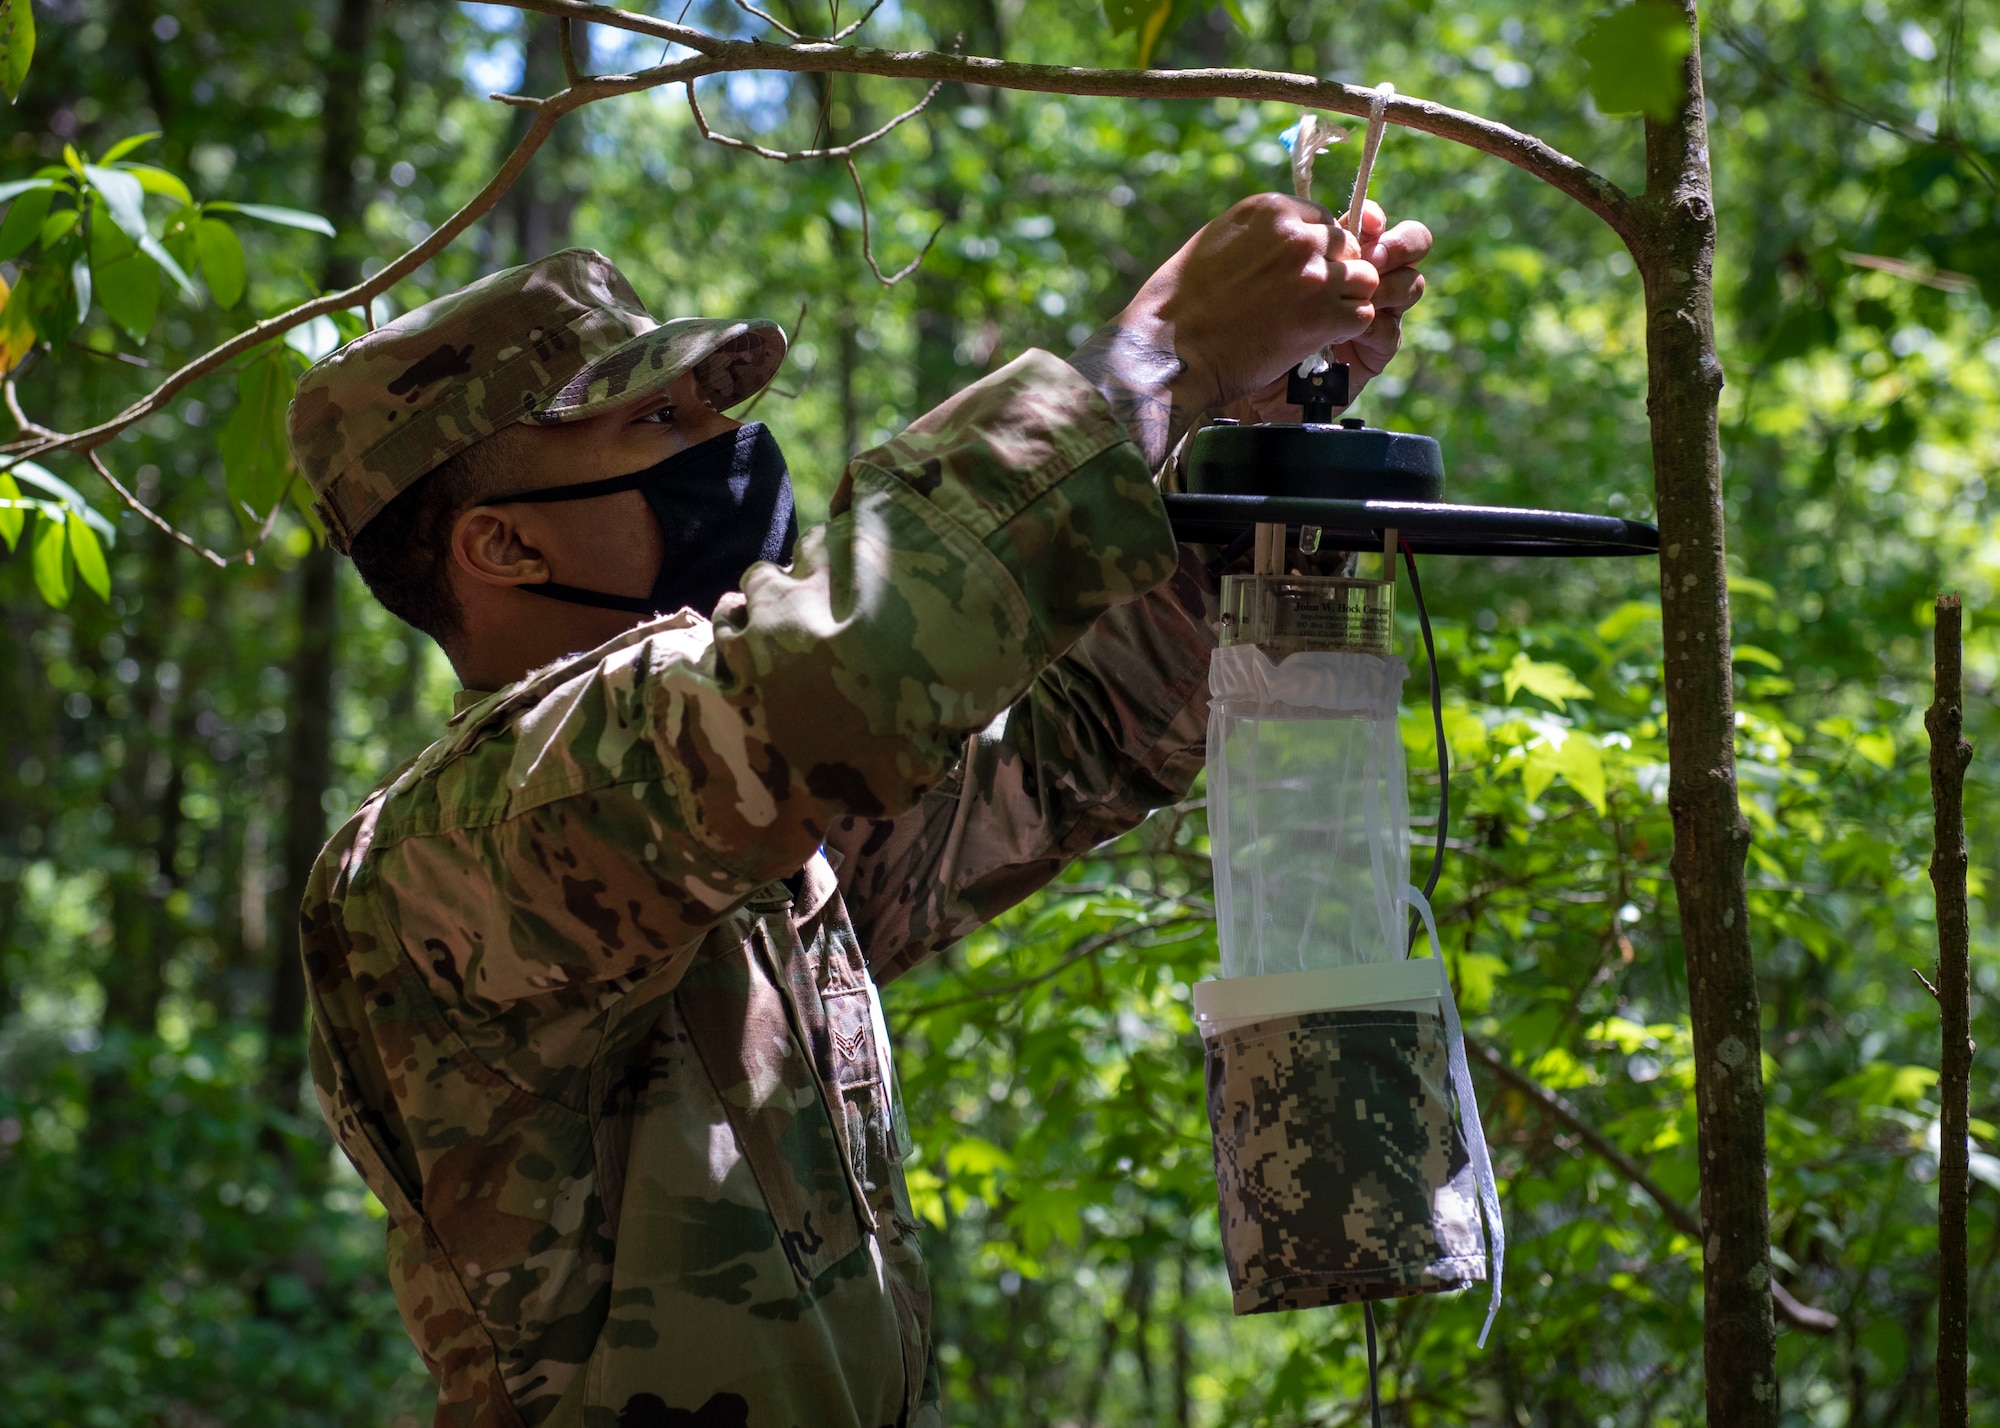 Airman 1st Class Ziaire Buchanan, 4th Operational Medical Readiness Squadron public health technician, sets out a Center for Disease Control light trap for vector surveillance at Seymour Johnson Air Force Base, North Carolina, April 29, 2021.